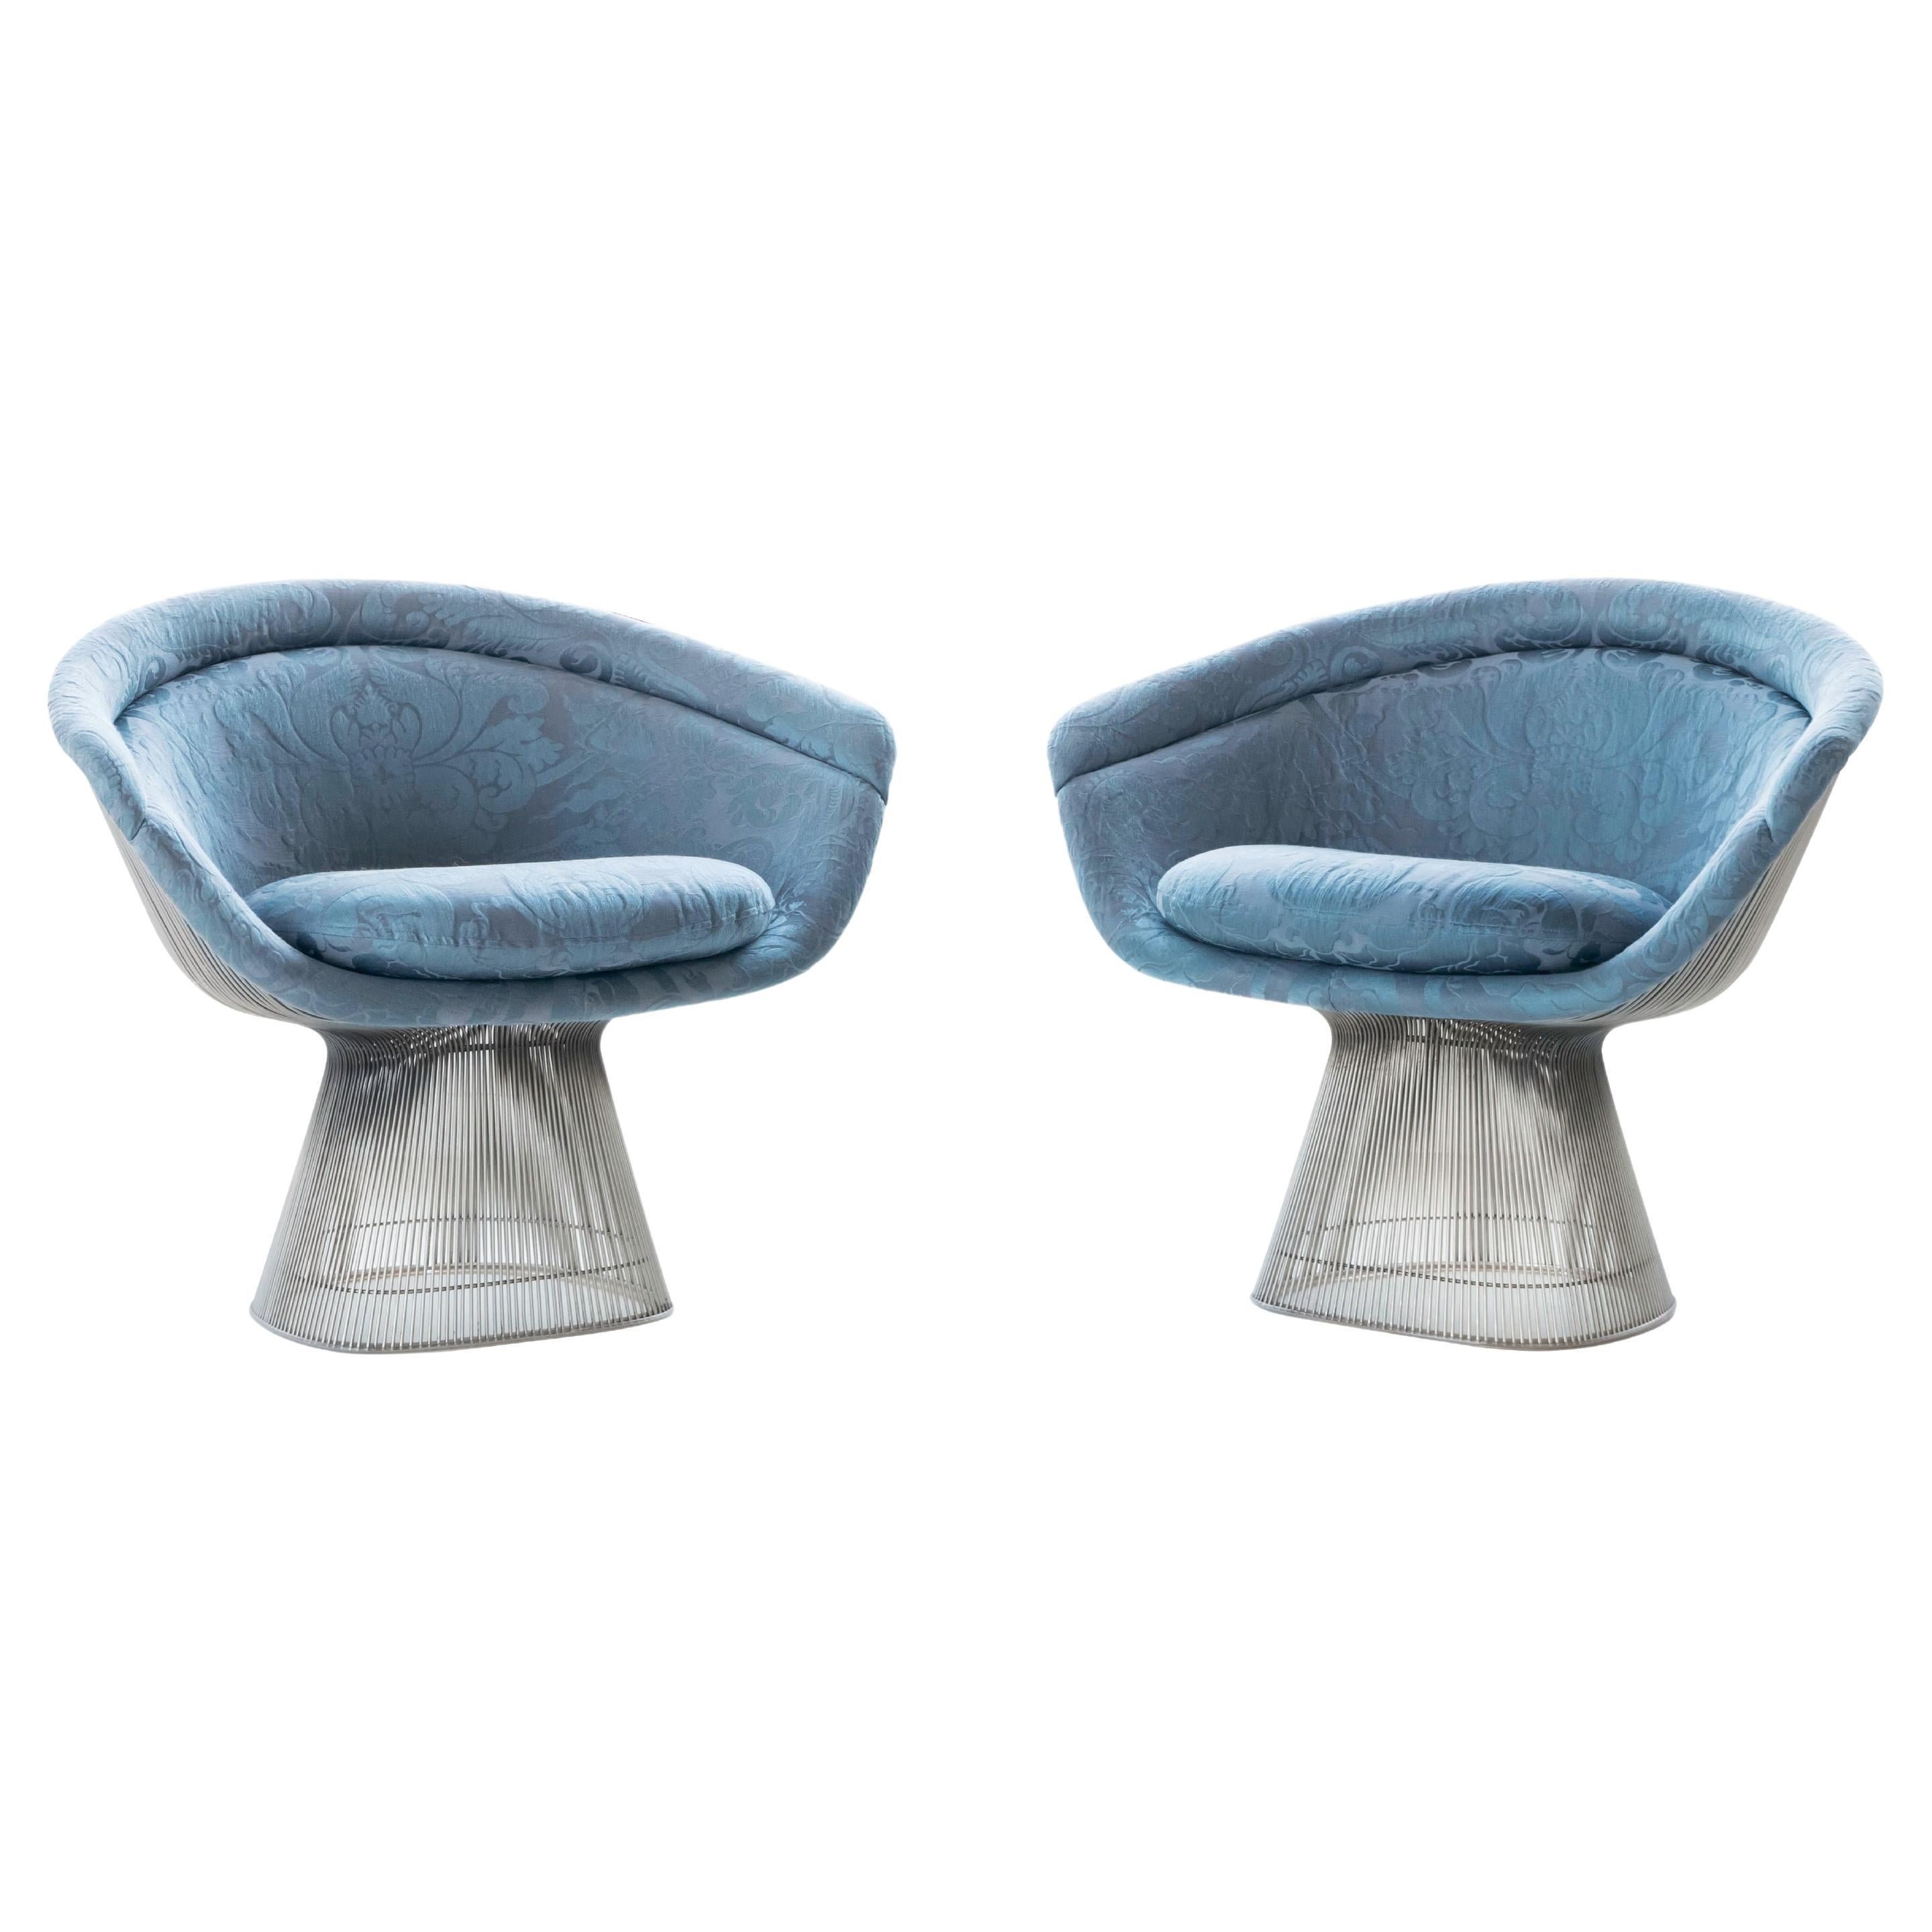 Warren Platner Pair of Wire Frame Lounge Chairs for Knoll, 1960's For Sale